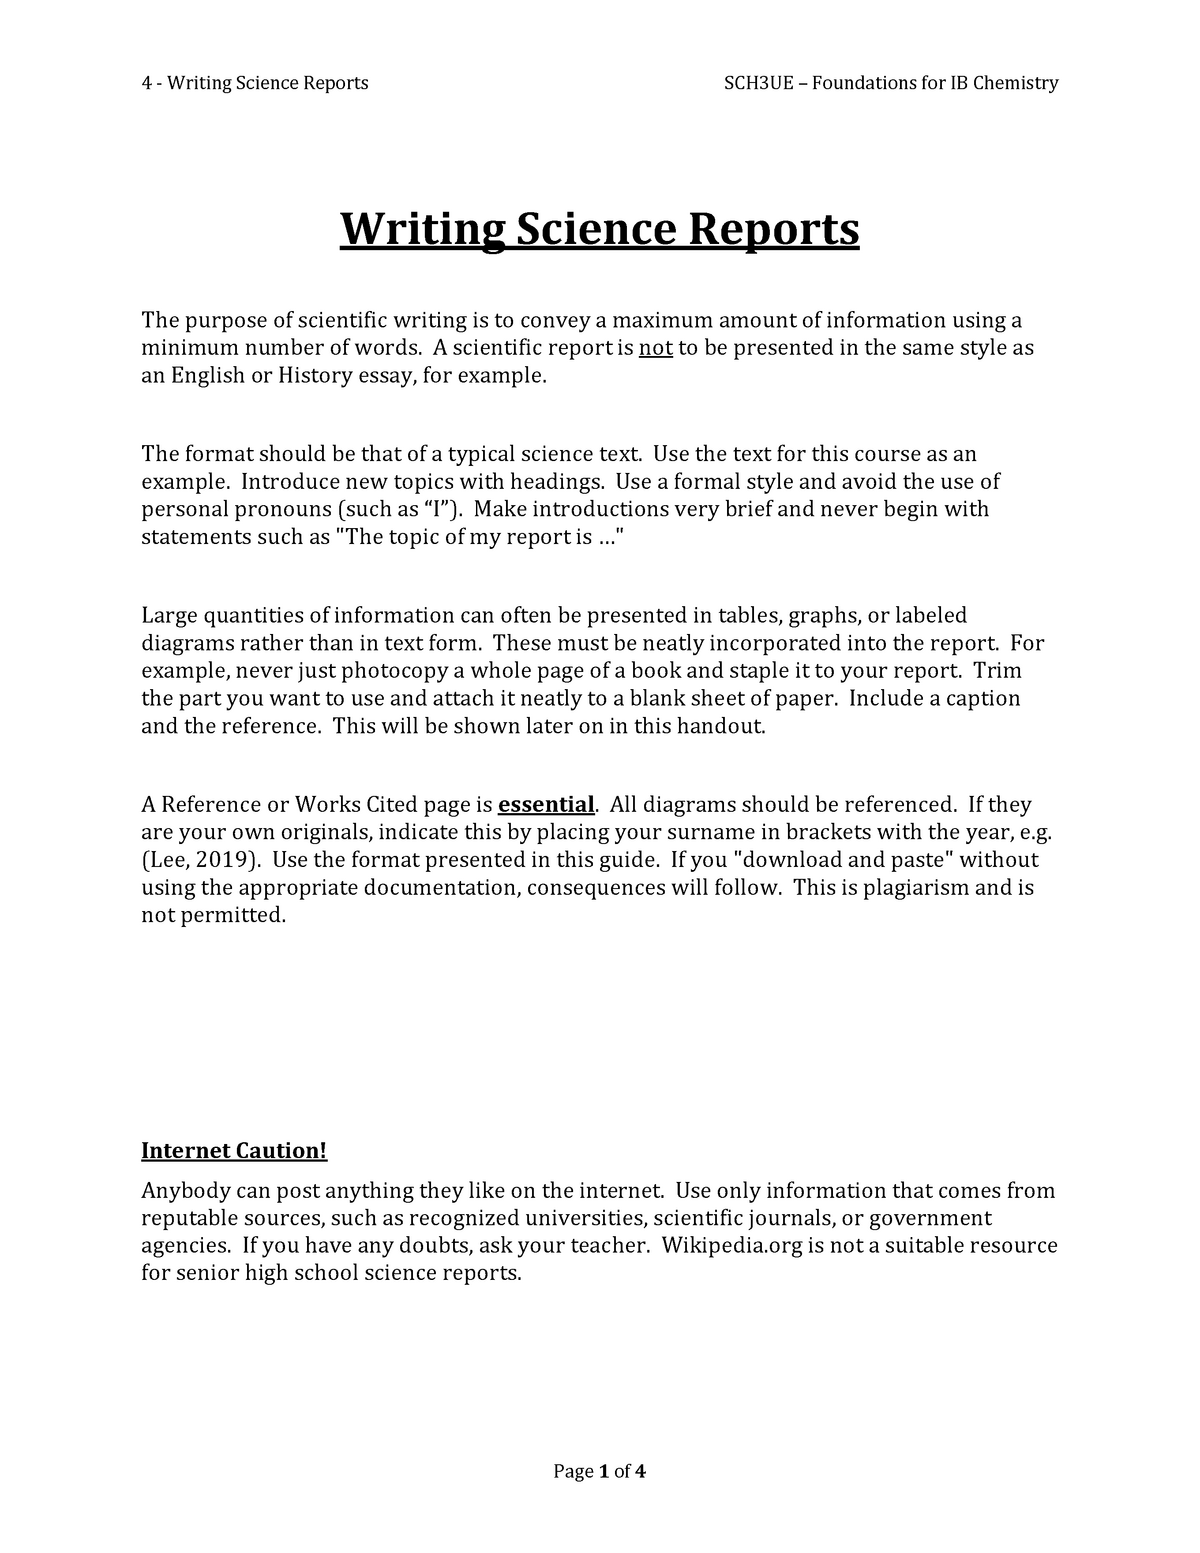 writing a science report discussion